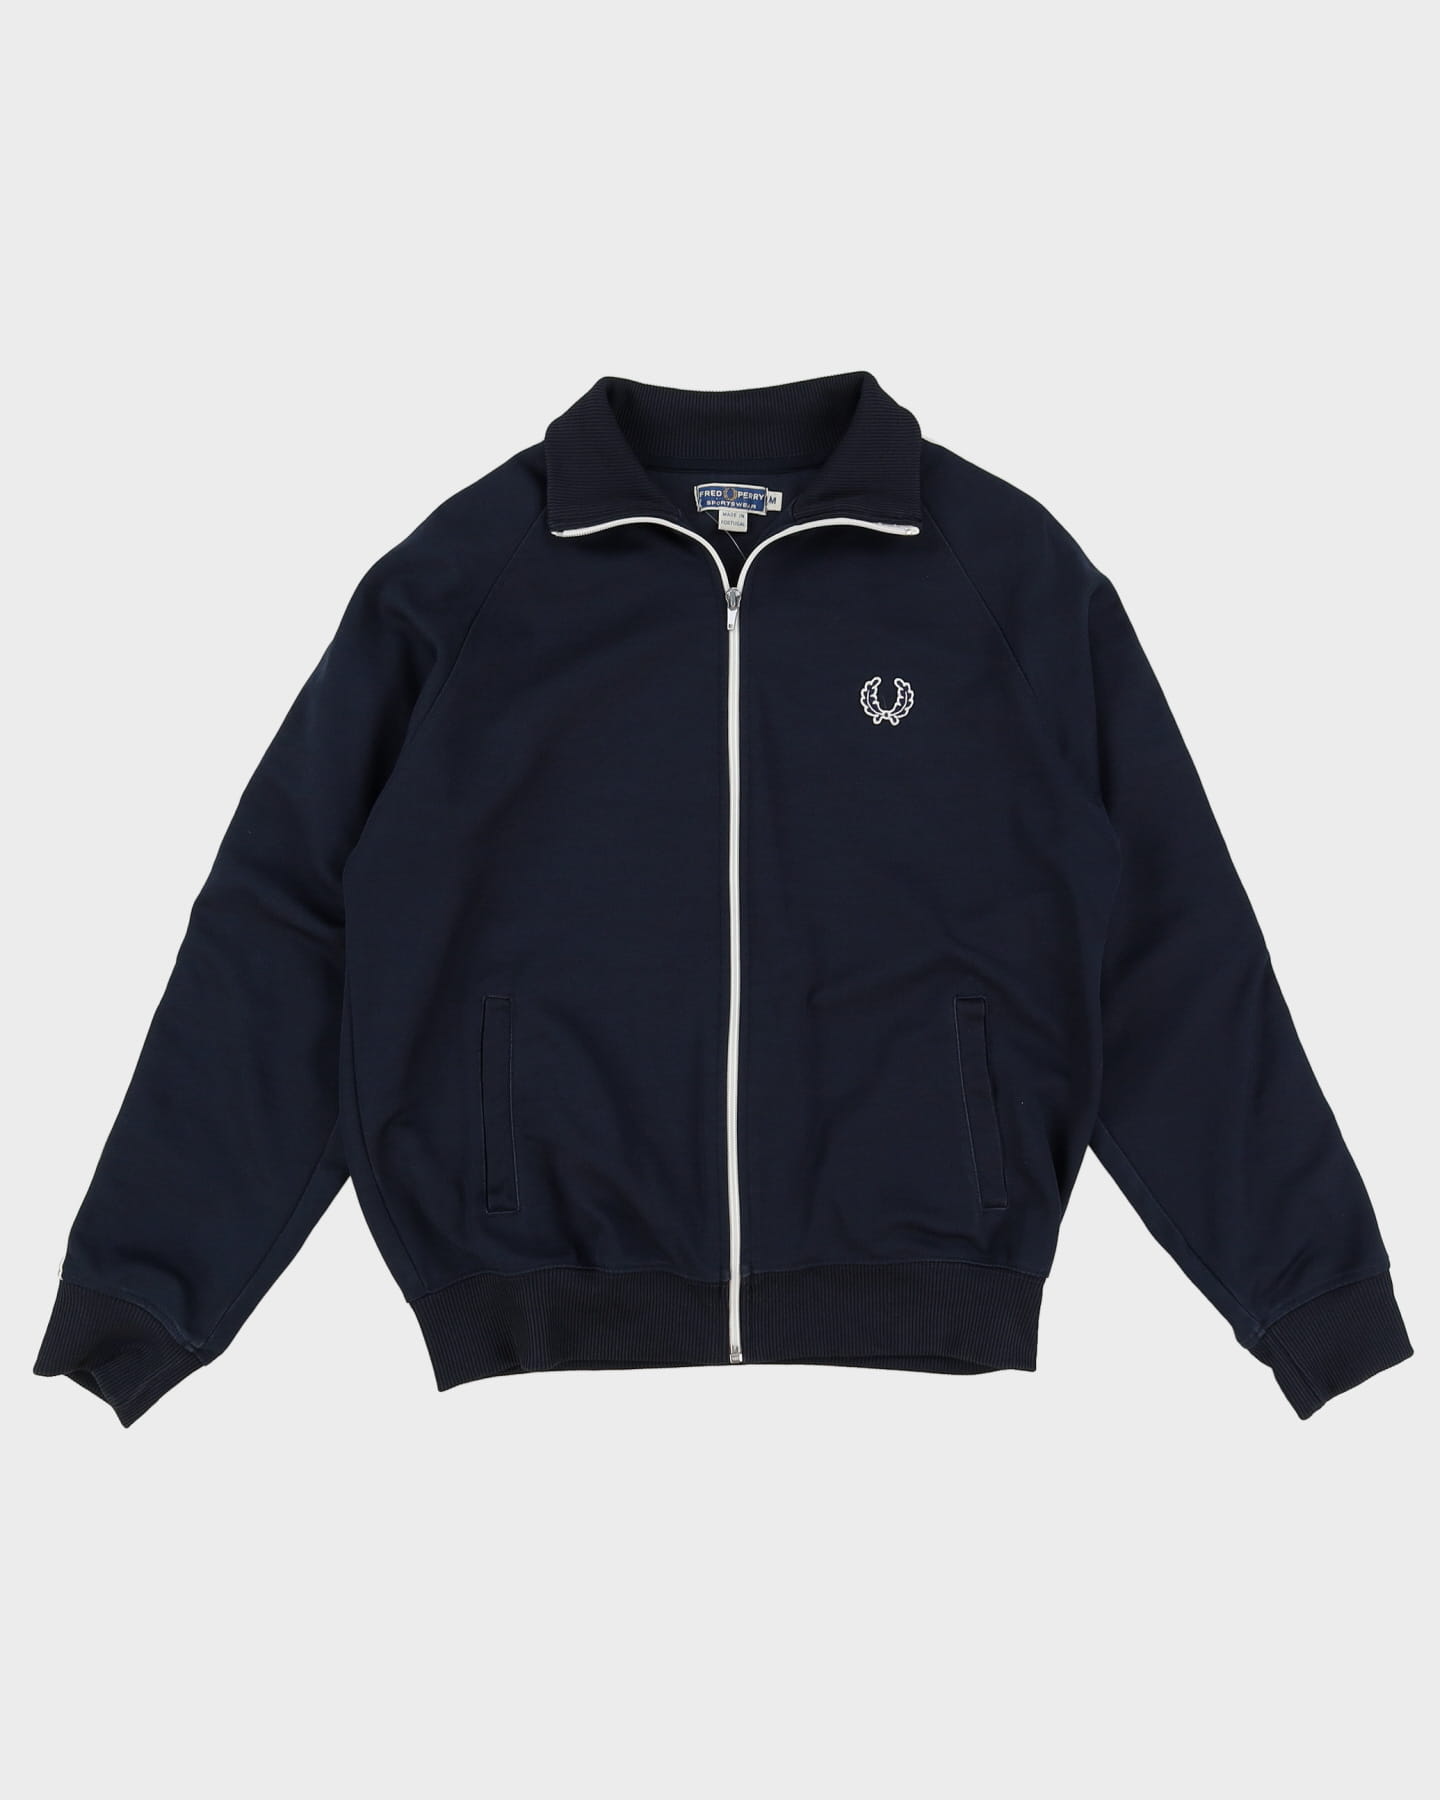 Vintage 90s Fred Perry Navy Track Jacket - M